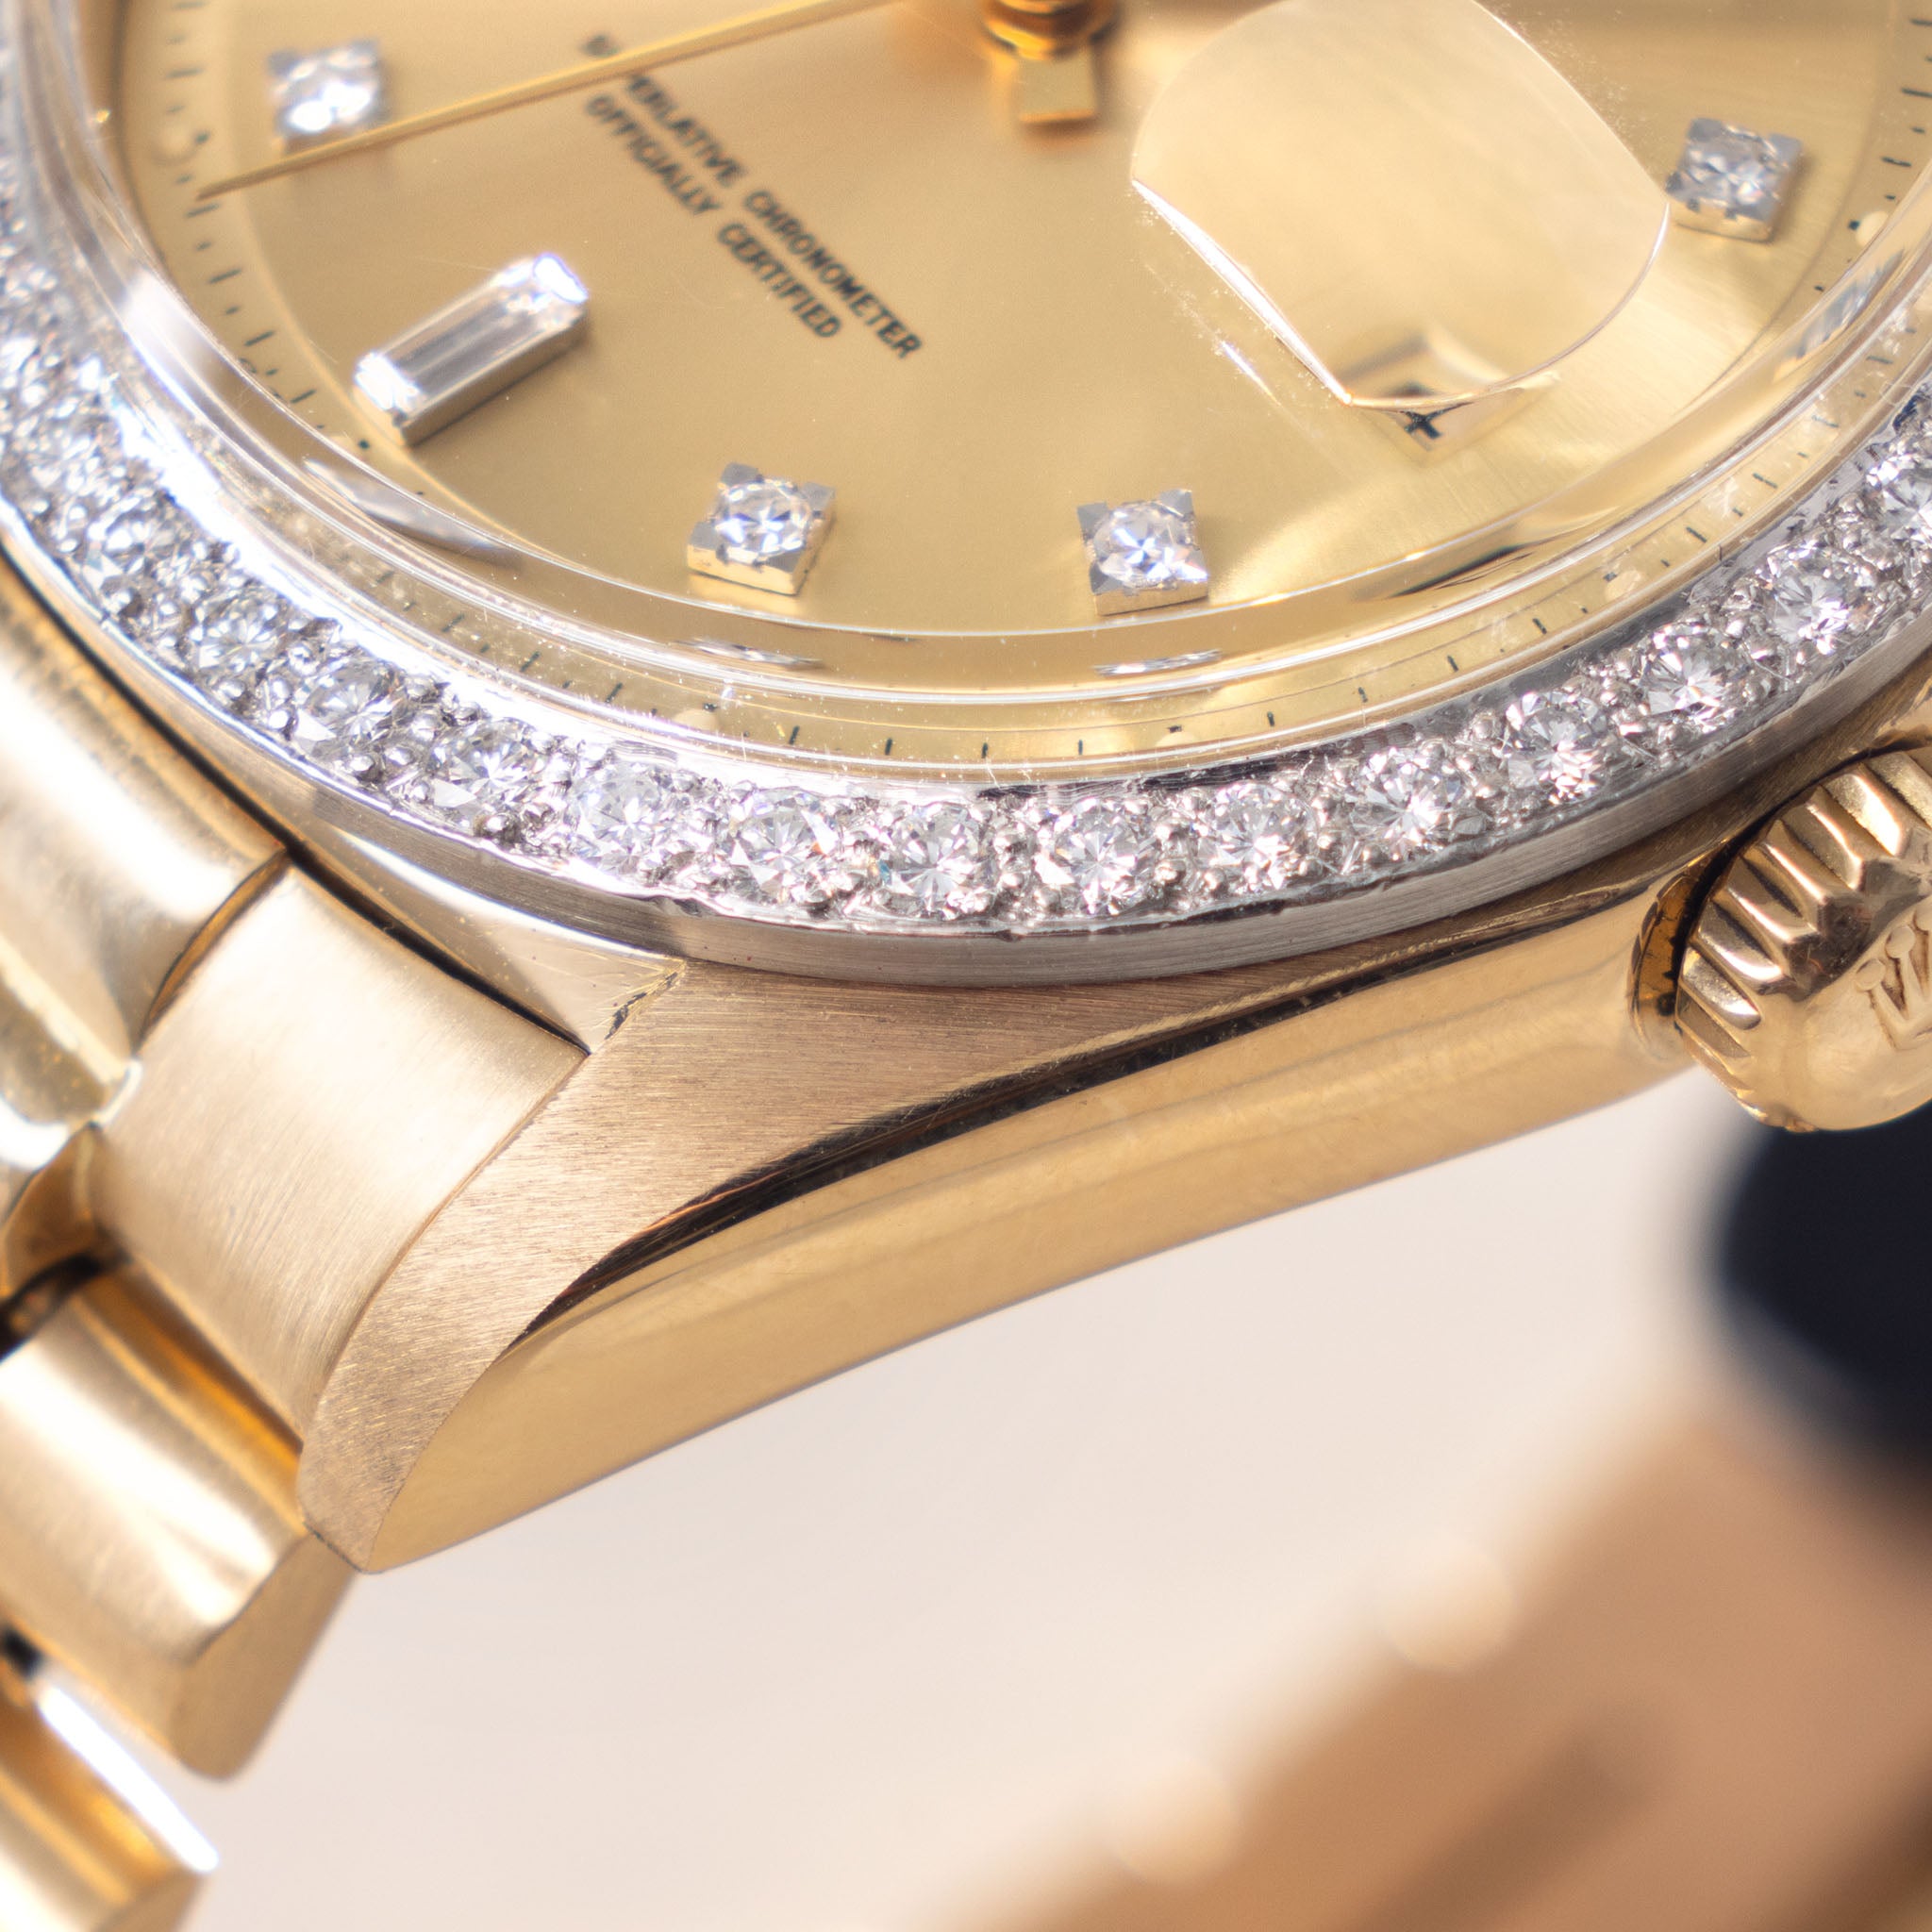 Rolex Day-Date Yellow Gold Champagne Diamond Dial Ref 1804